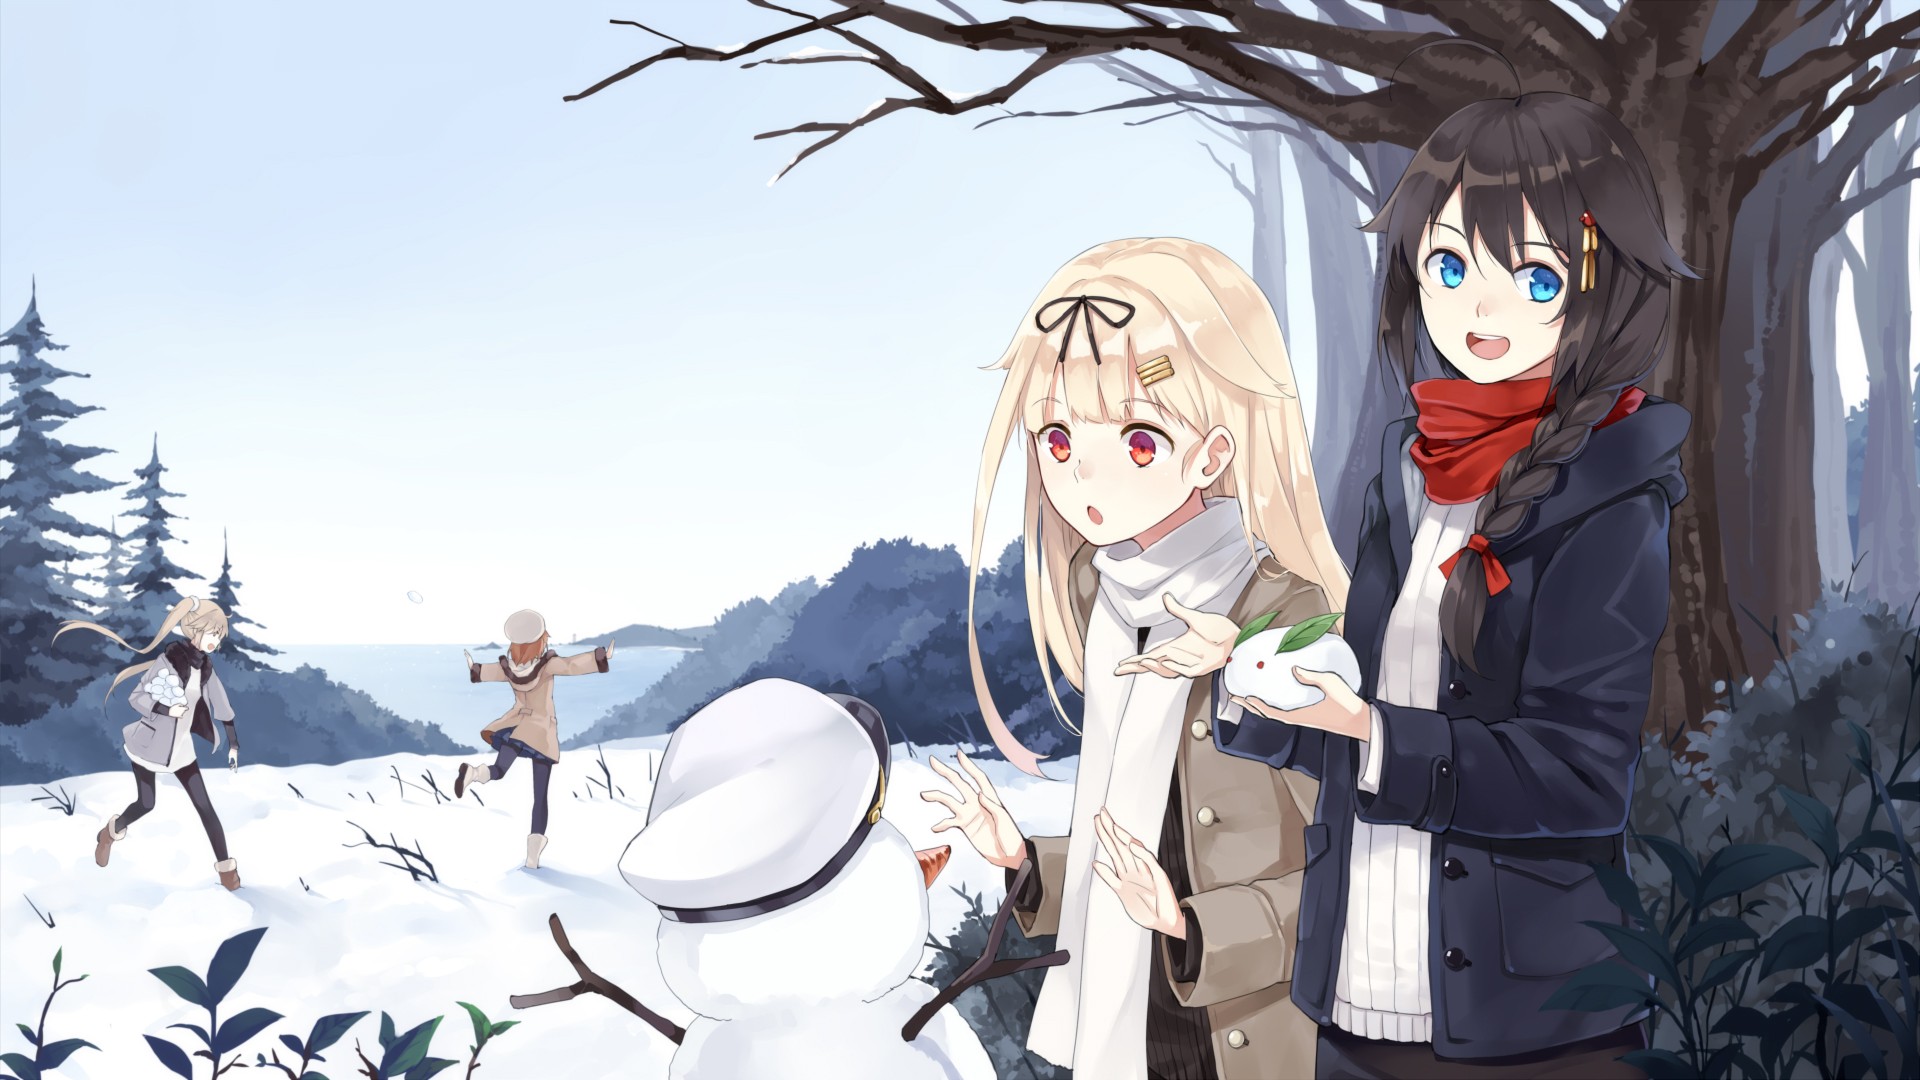 Anime 1920x1080 Kantai Collection Yuudachi (KanColle) Shigure (KanColle) snowman winter outdoors cold anime girls anime group of women women outdoors blue eyes open mouth brunette snow trees scarf